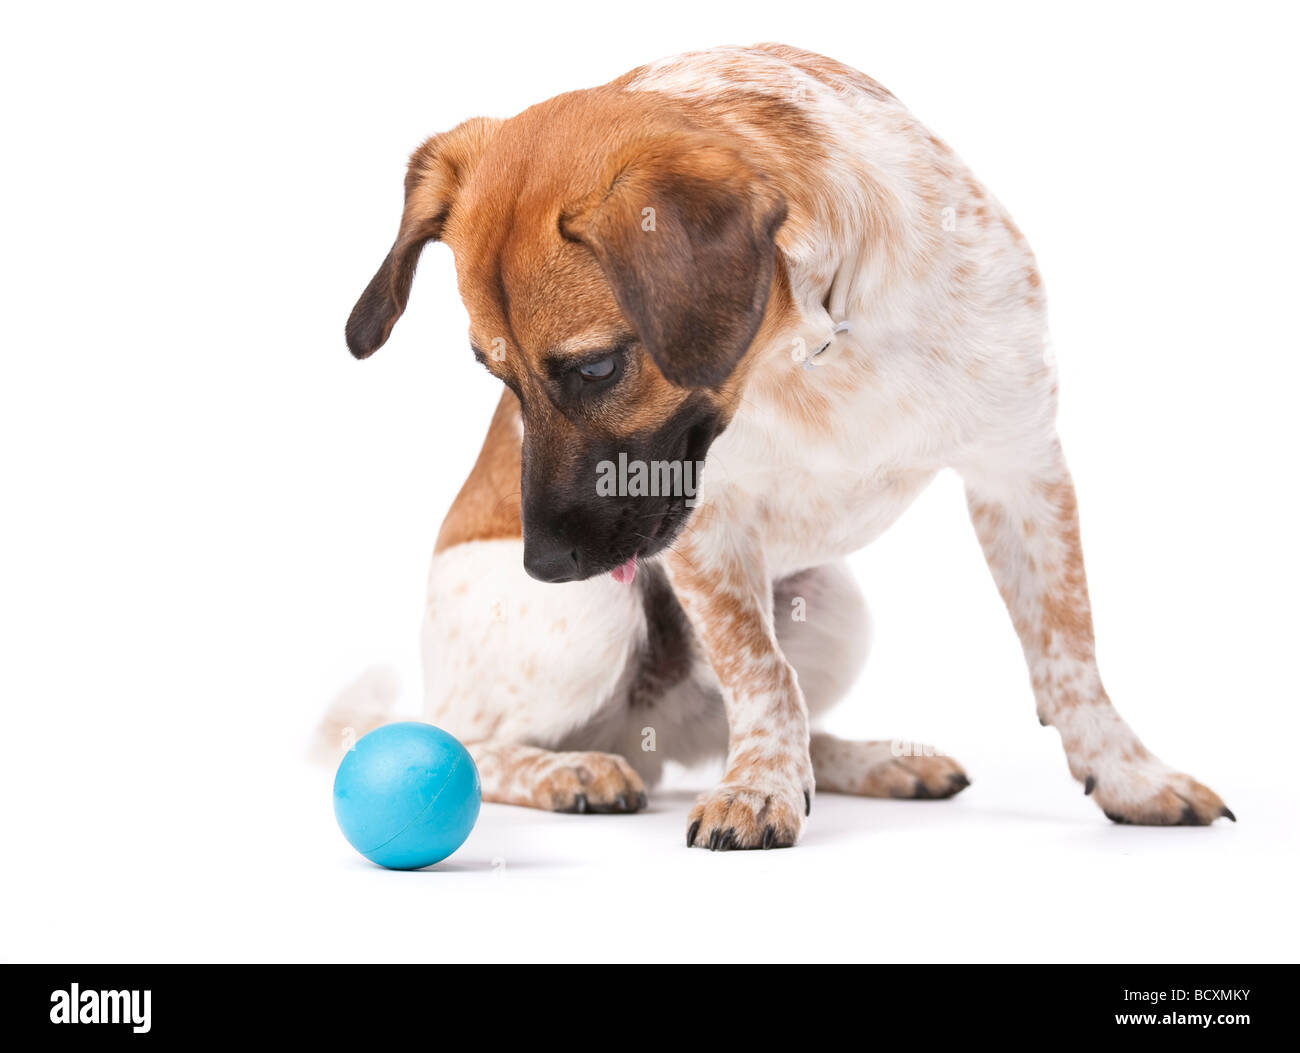 Little white and brown dog focusing sharply on a blue ball Studio shot Isolated on white Stock Photo